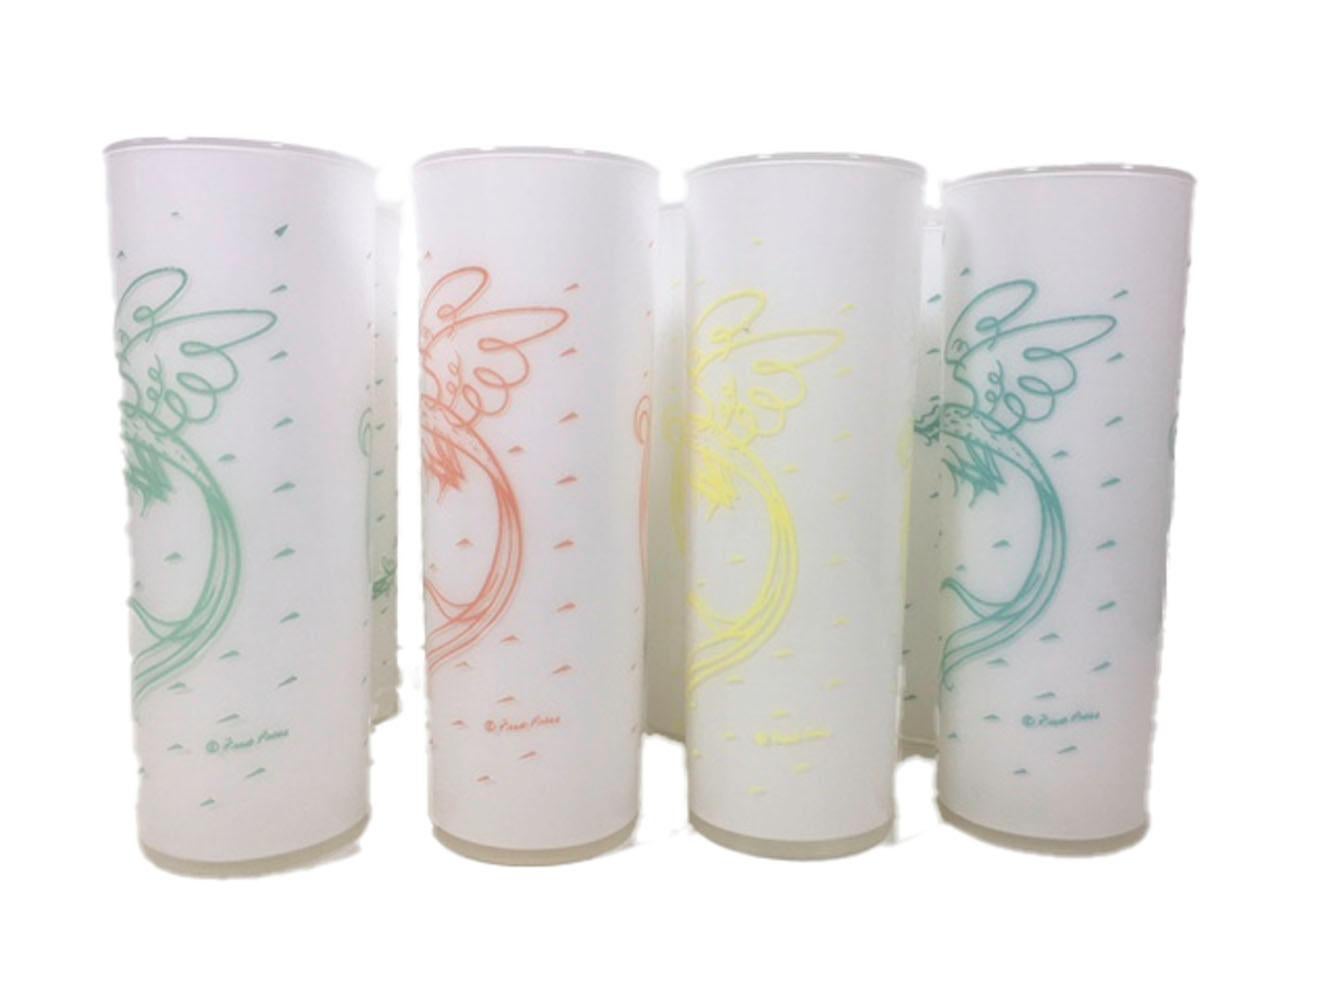 American Vintage Fred Press Rooster Tom Collins Glasses in 4 Colors on White Ground For Sale